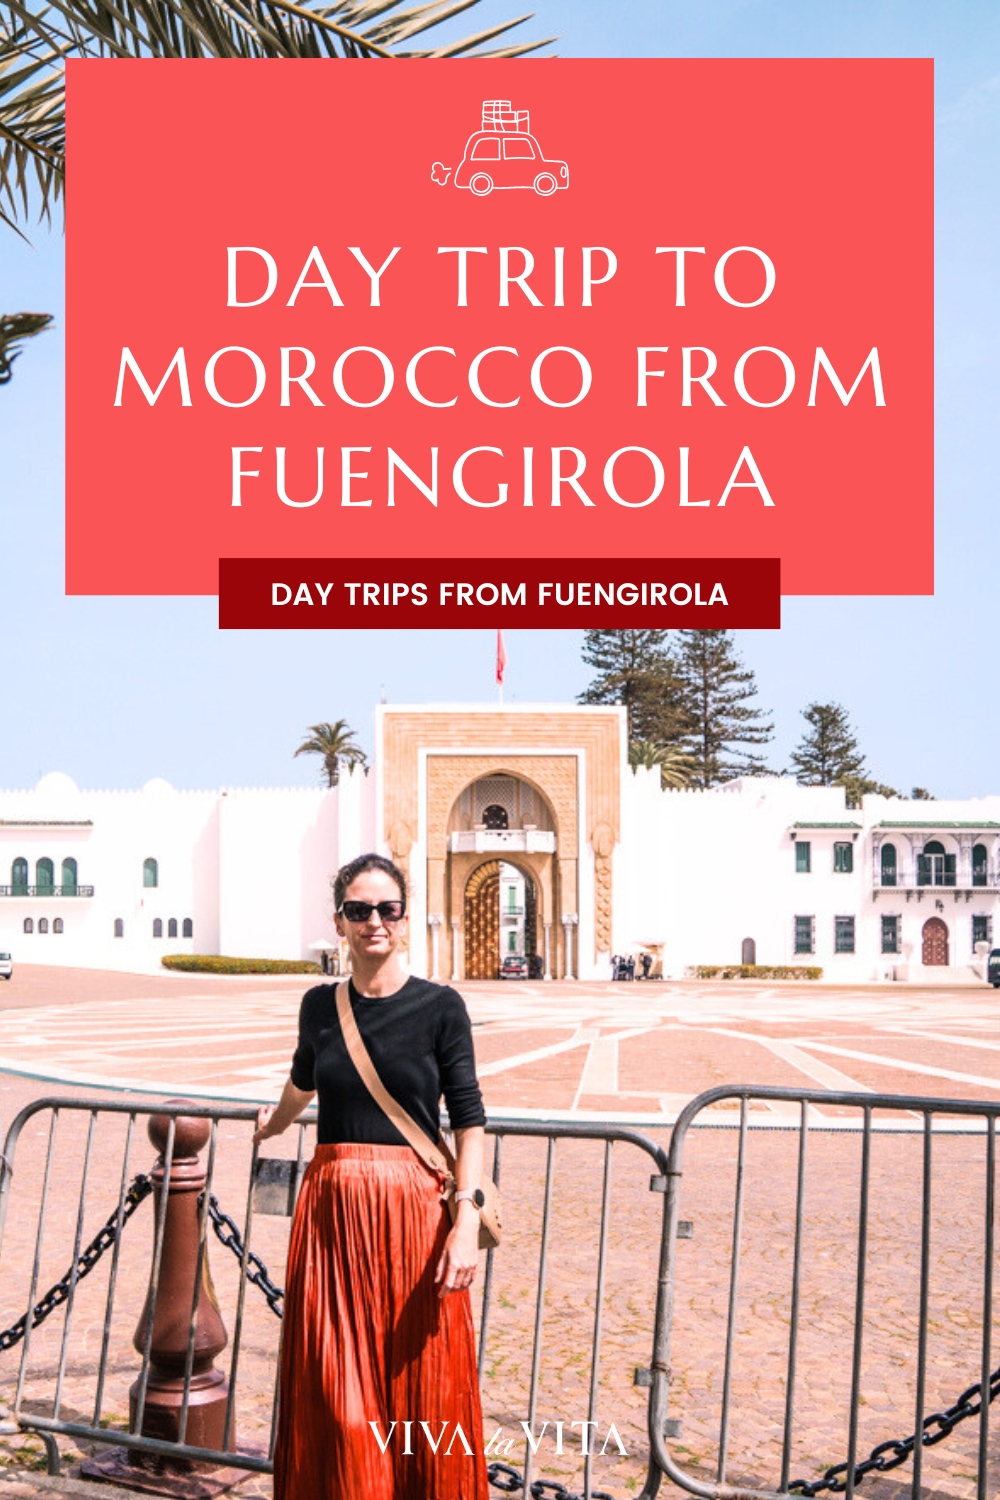 pinterest image showing a woman in front of the Royal Palace of Tetouan in Morocco, with a headline - day trip to Morocco from Fuengirola, Day trips from Fuengirola